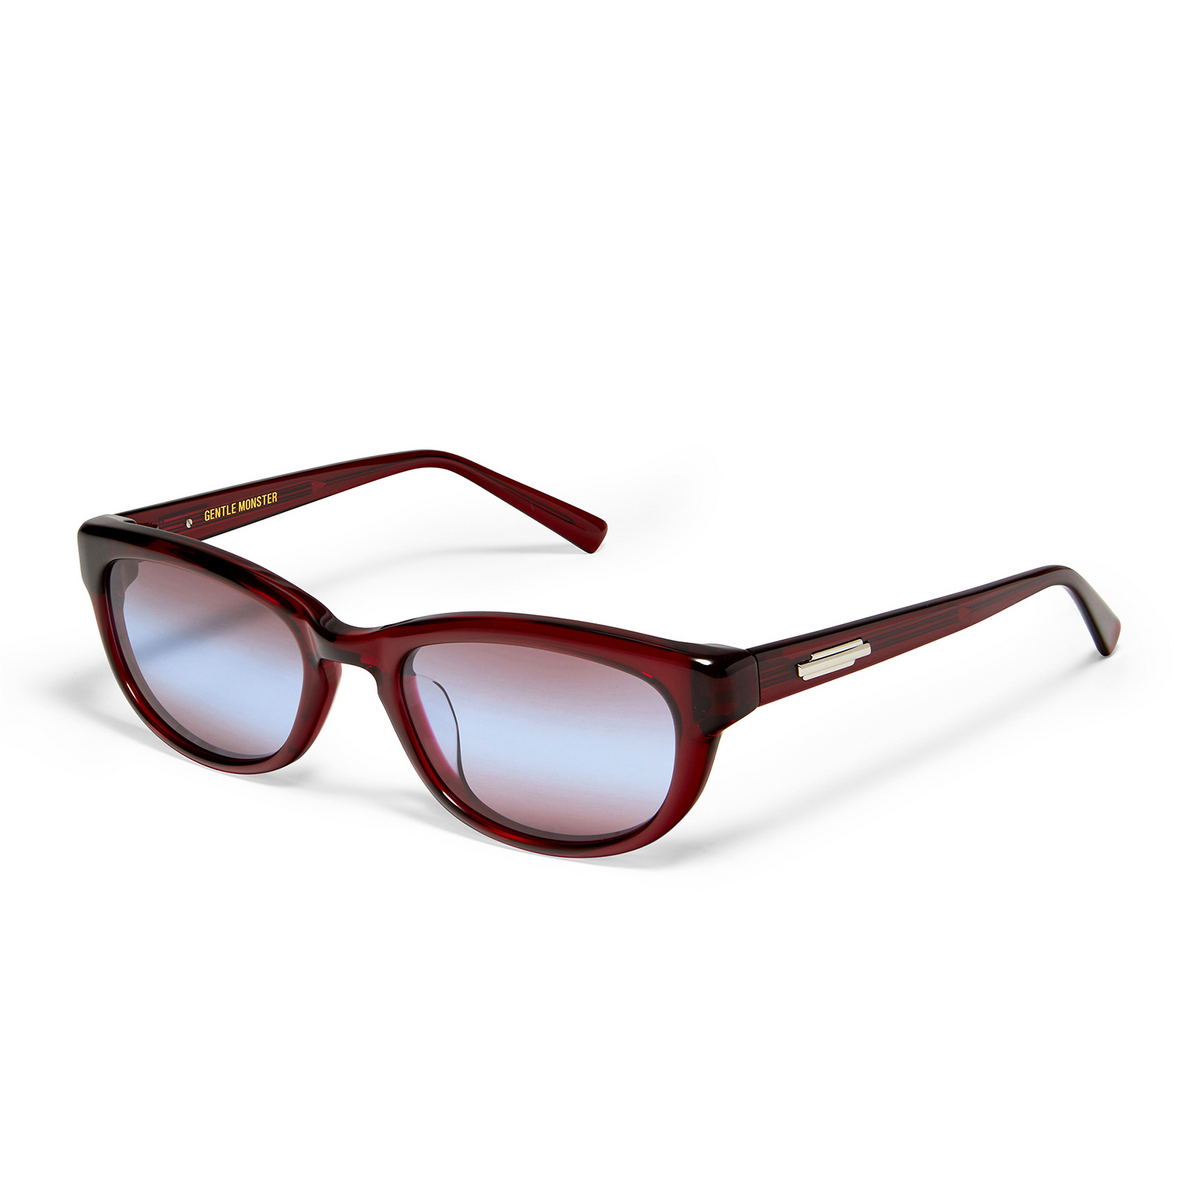 Gentle Monster® Cat-eye Sunglasses: Reny color Red RC2 - three-quarters view.